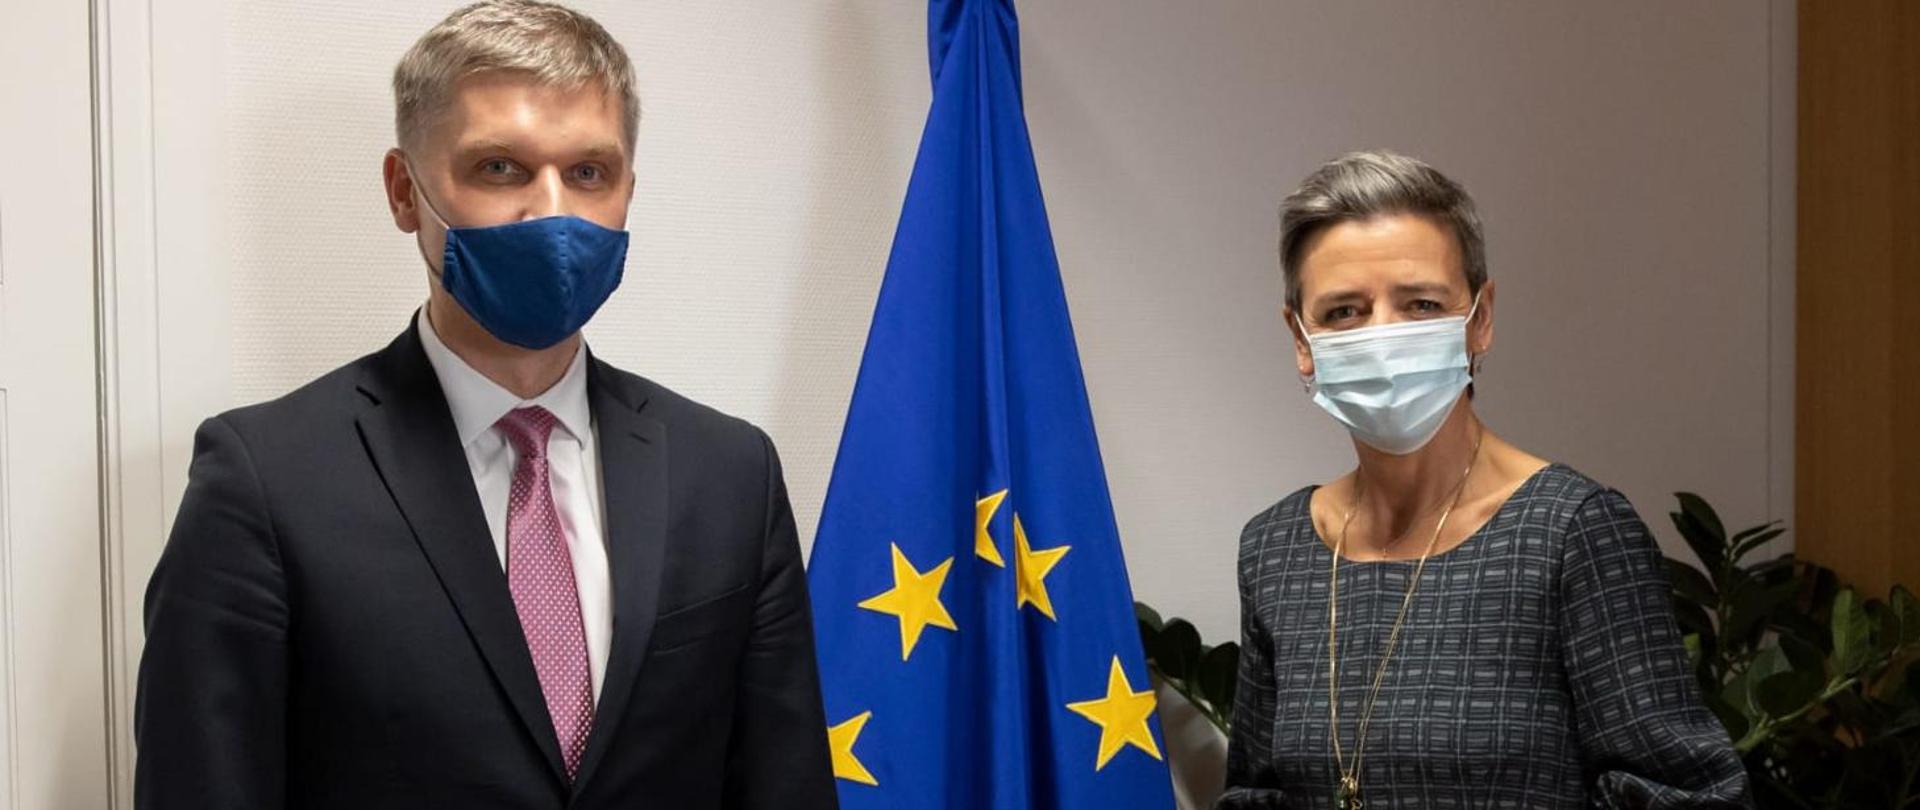 Minister of Economic Development and Technology Piotr Nowag and Executive Vice-President of European Commission Margrethe Vestager